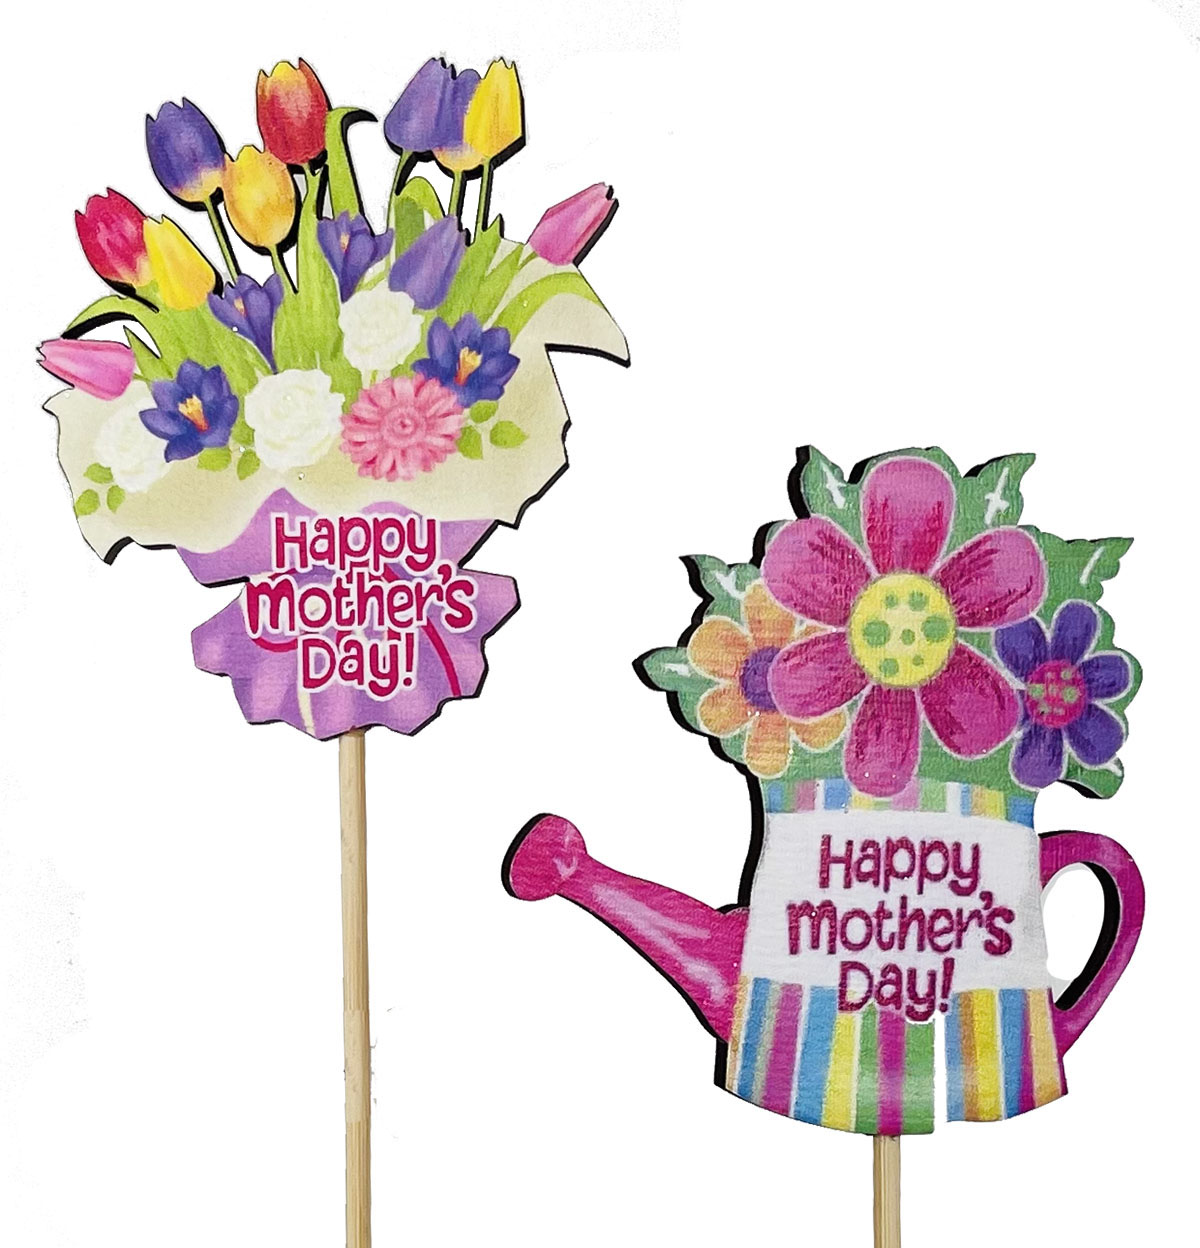 Mother's Day Pick S/12
21"